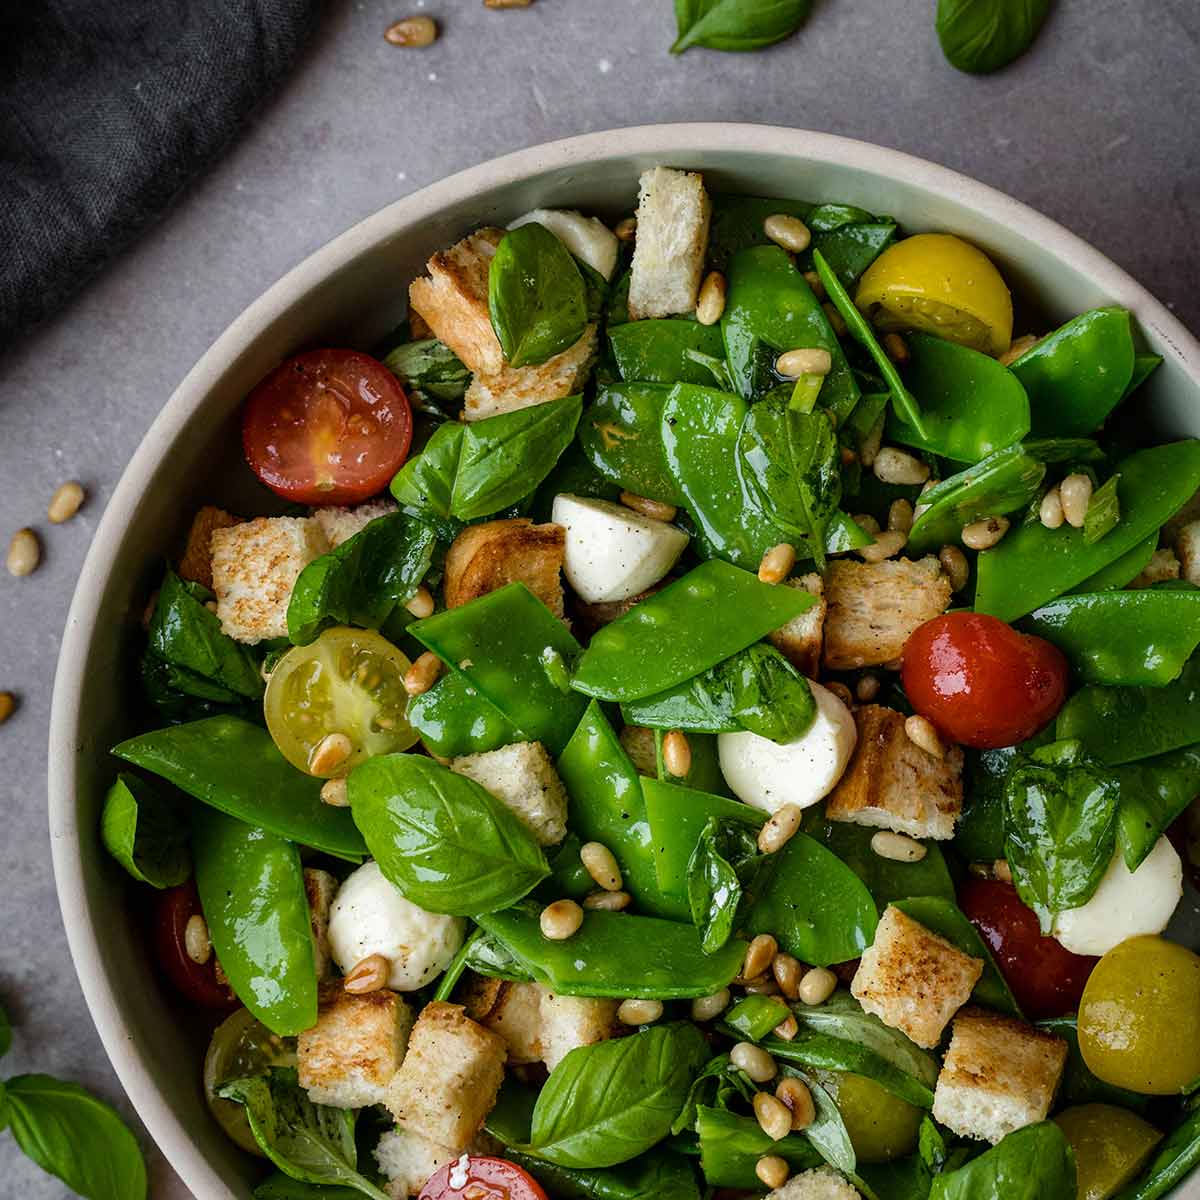 Snow pea salad with croutons featured photo